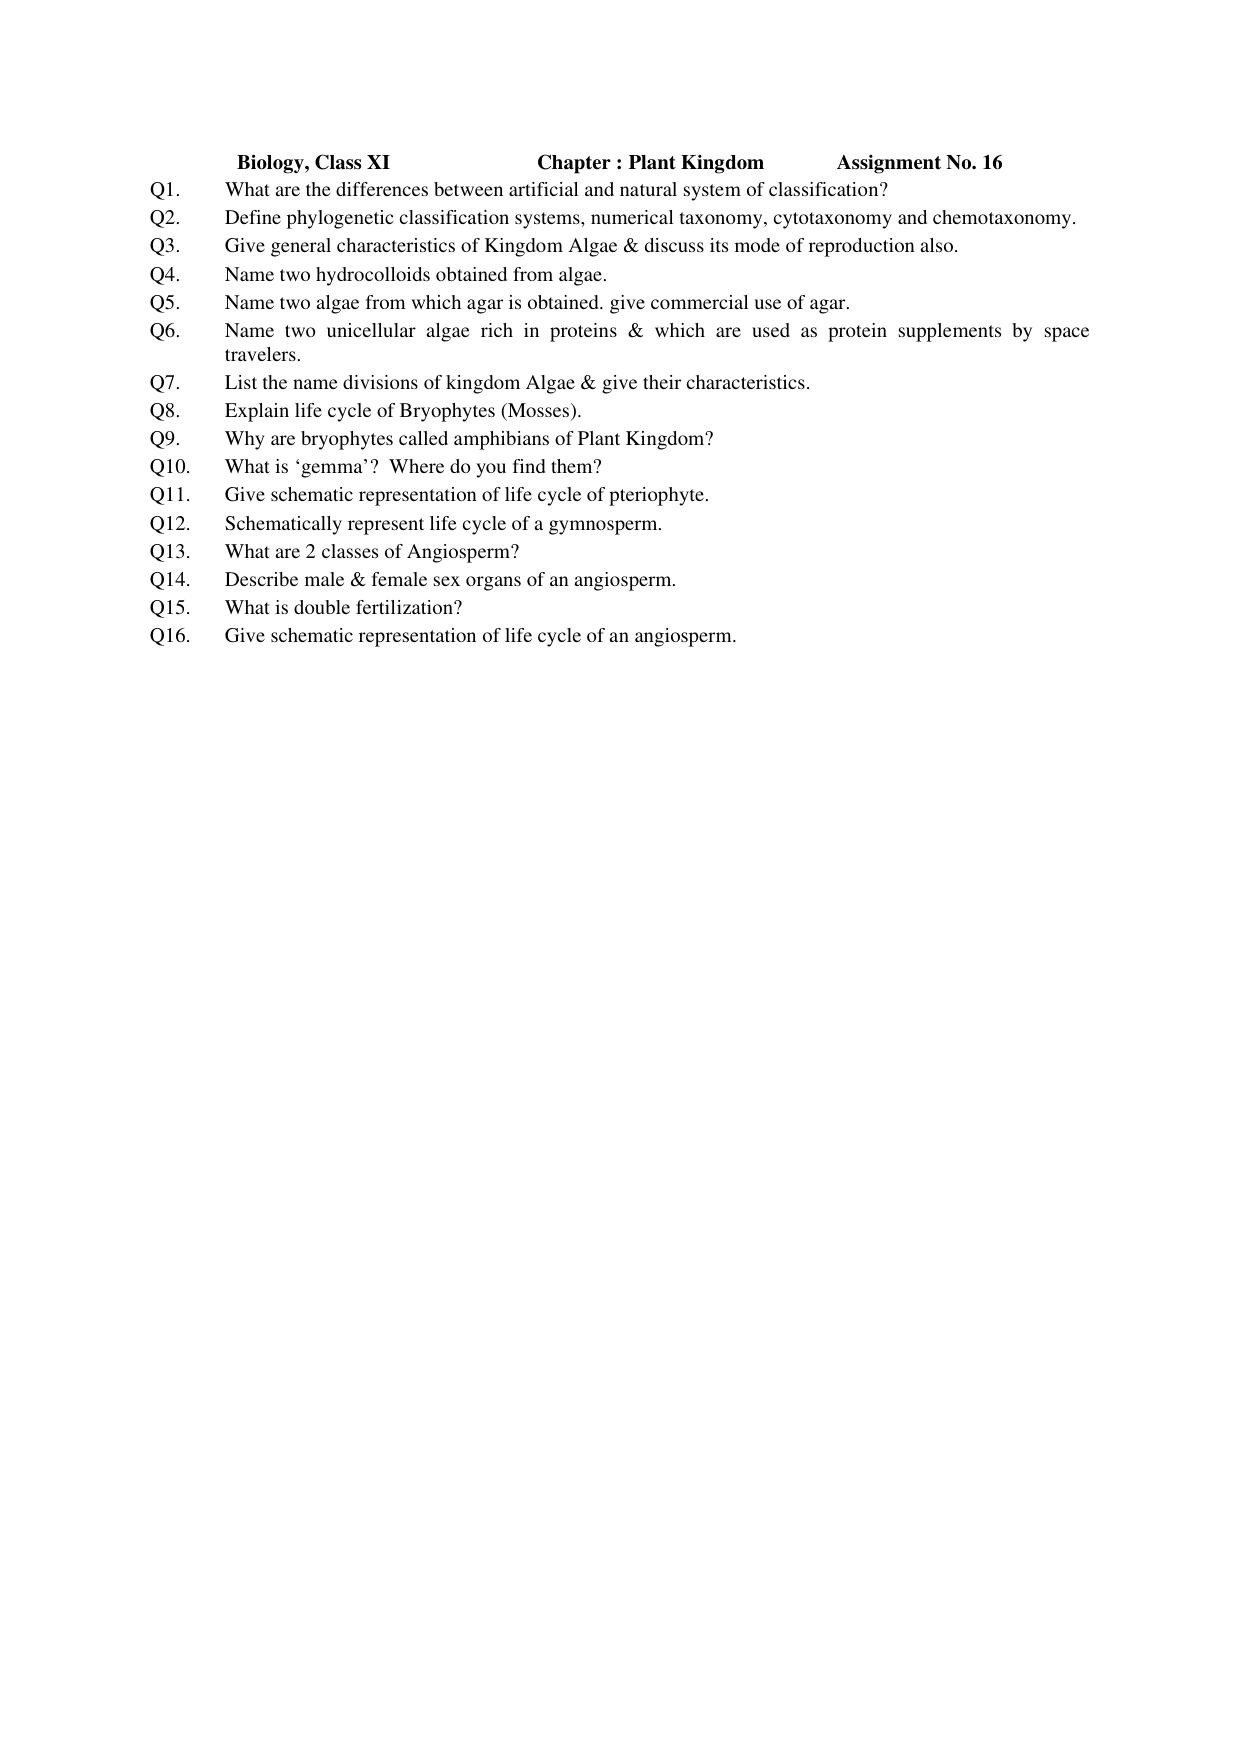 CBSE Worksheets for Class 11 Biology Assignment 16 - Page 1